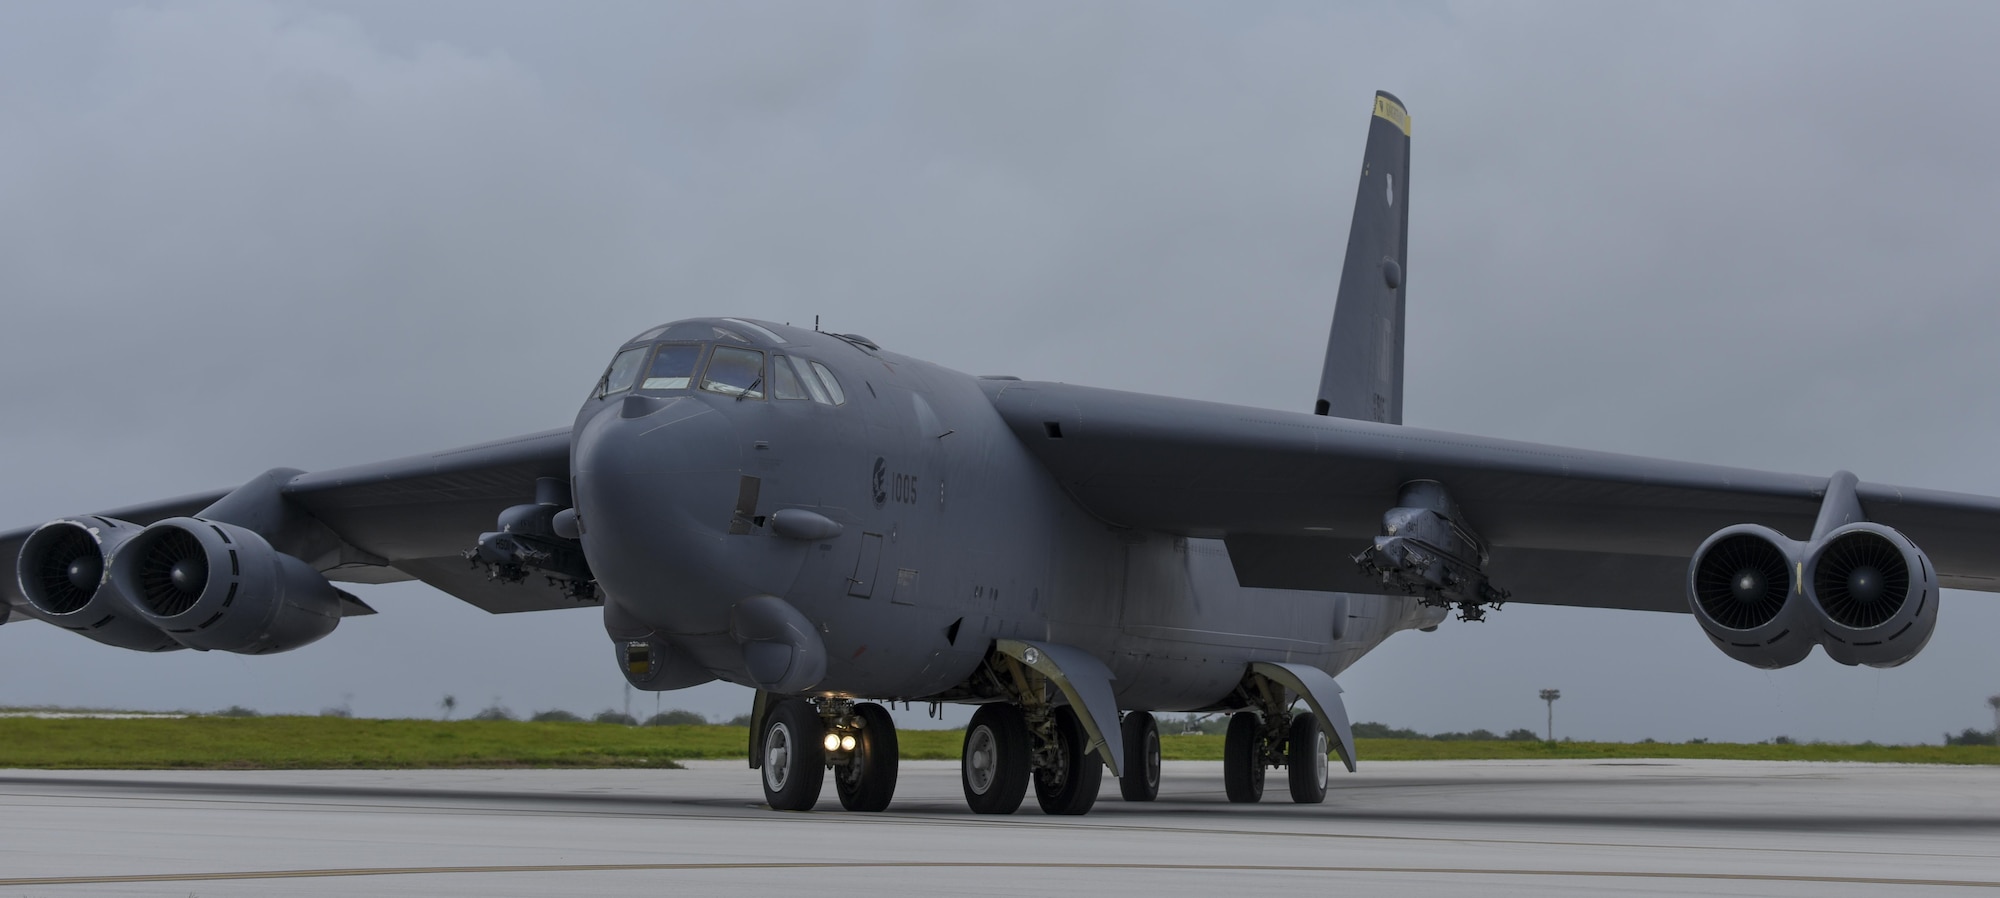 A U.S. Air Force B-52 Stratofortress taxis at Andersen Air Force Base, Guam, for an integrated bomber operation Aug.17, 2016. This mission marks the first time in history that all three of Air Force Global Strike Command's strategic bomber aircraft are simultaneously conducting integrated operations in the U.S. Pacific Command area of operations. As of Aug. 15, the B-1 Lancer will be temporarily deployed to Guam in support of U.S. Pacific Command's Continuous Bomber Presence mission. (U.S. Air Force photo by Tech Sgt Richard P. Ebensberger/Released)